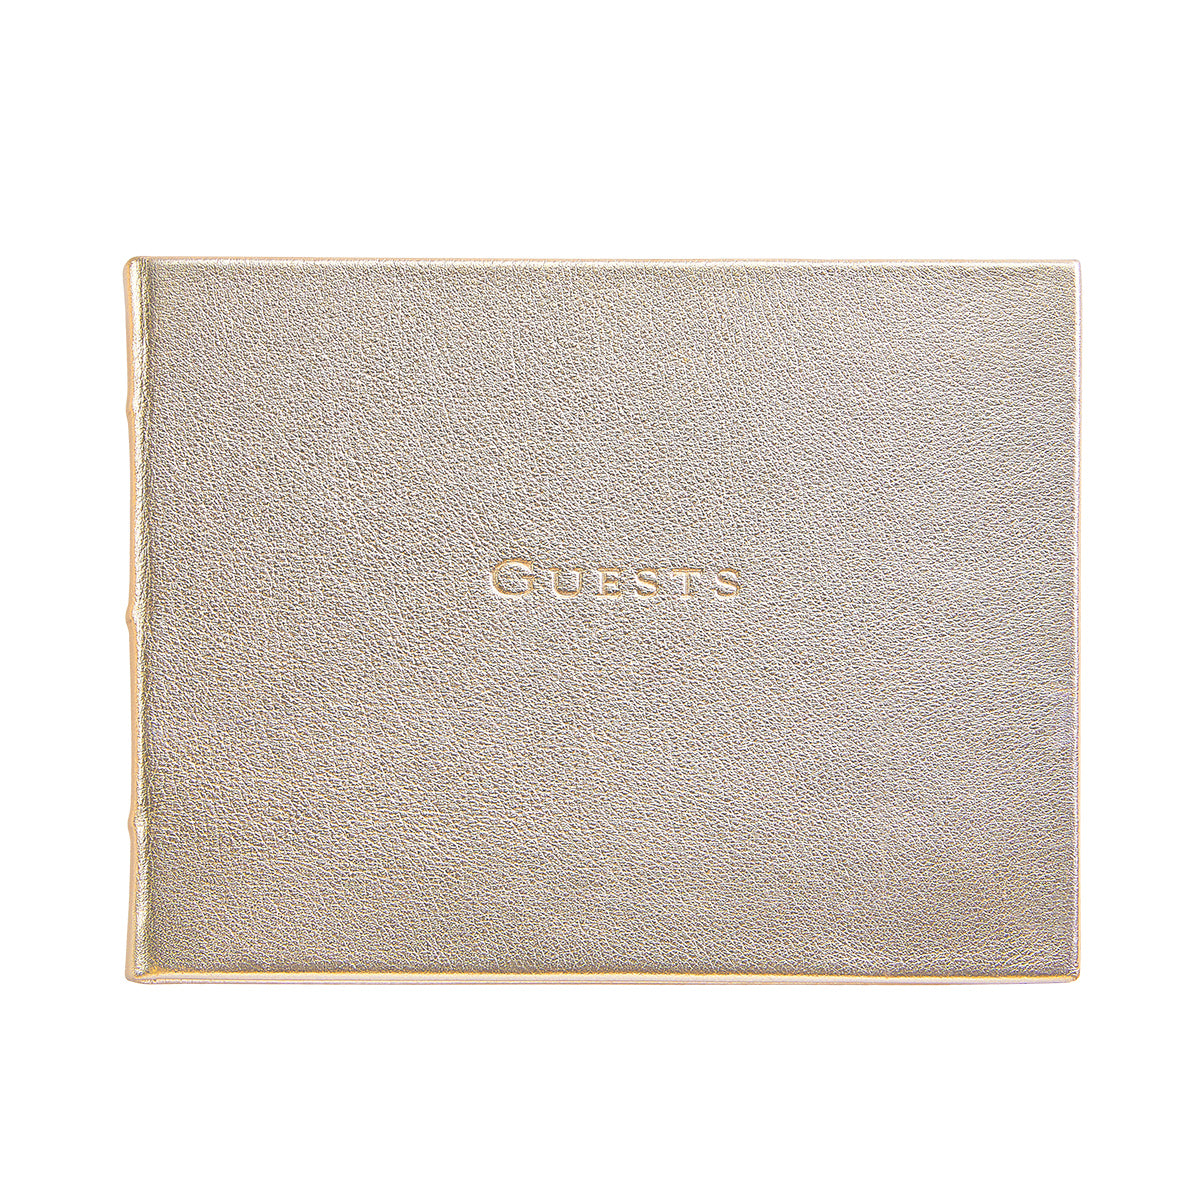 Graphic Image Guest Book White Gold Metallics Leather